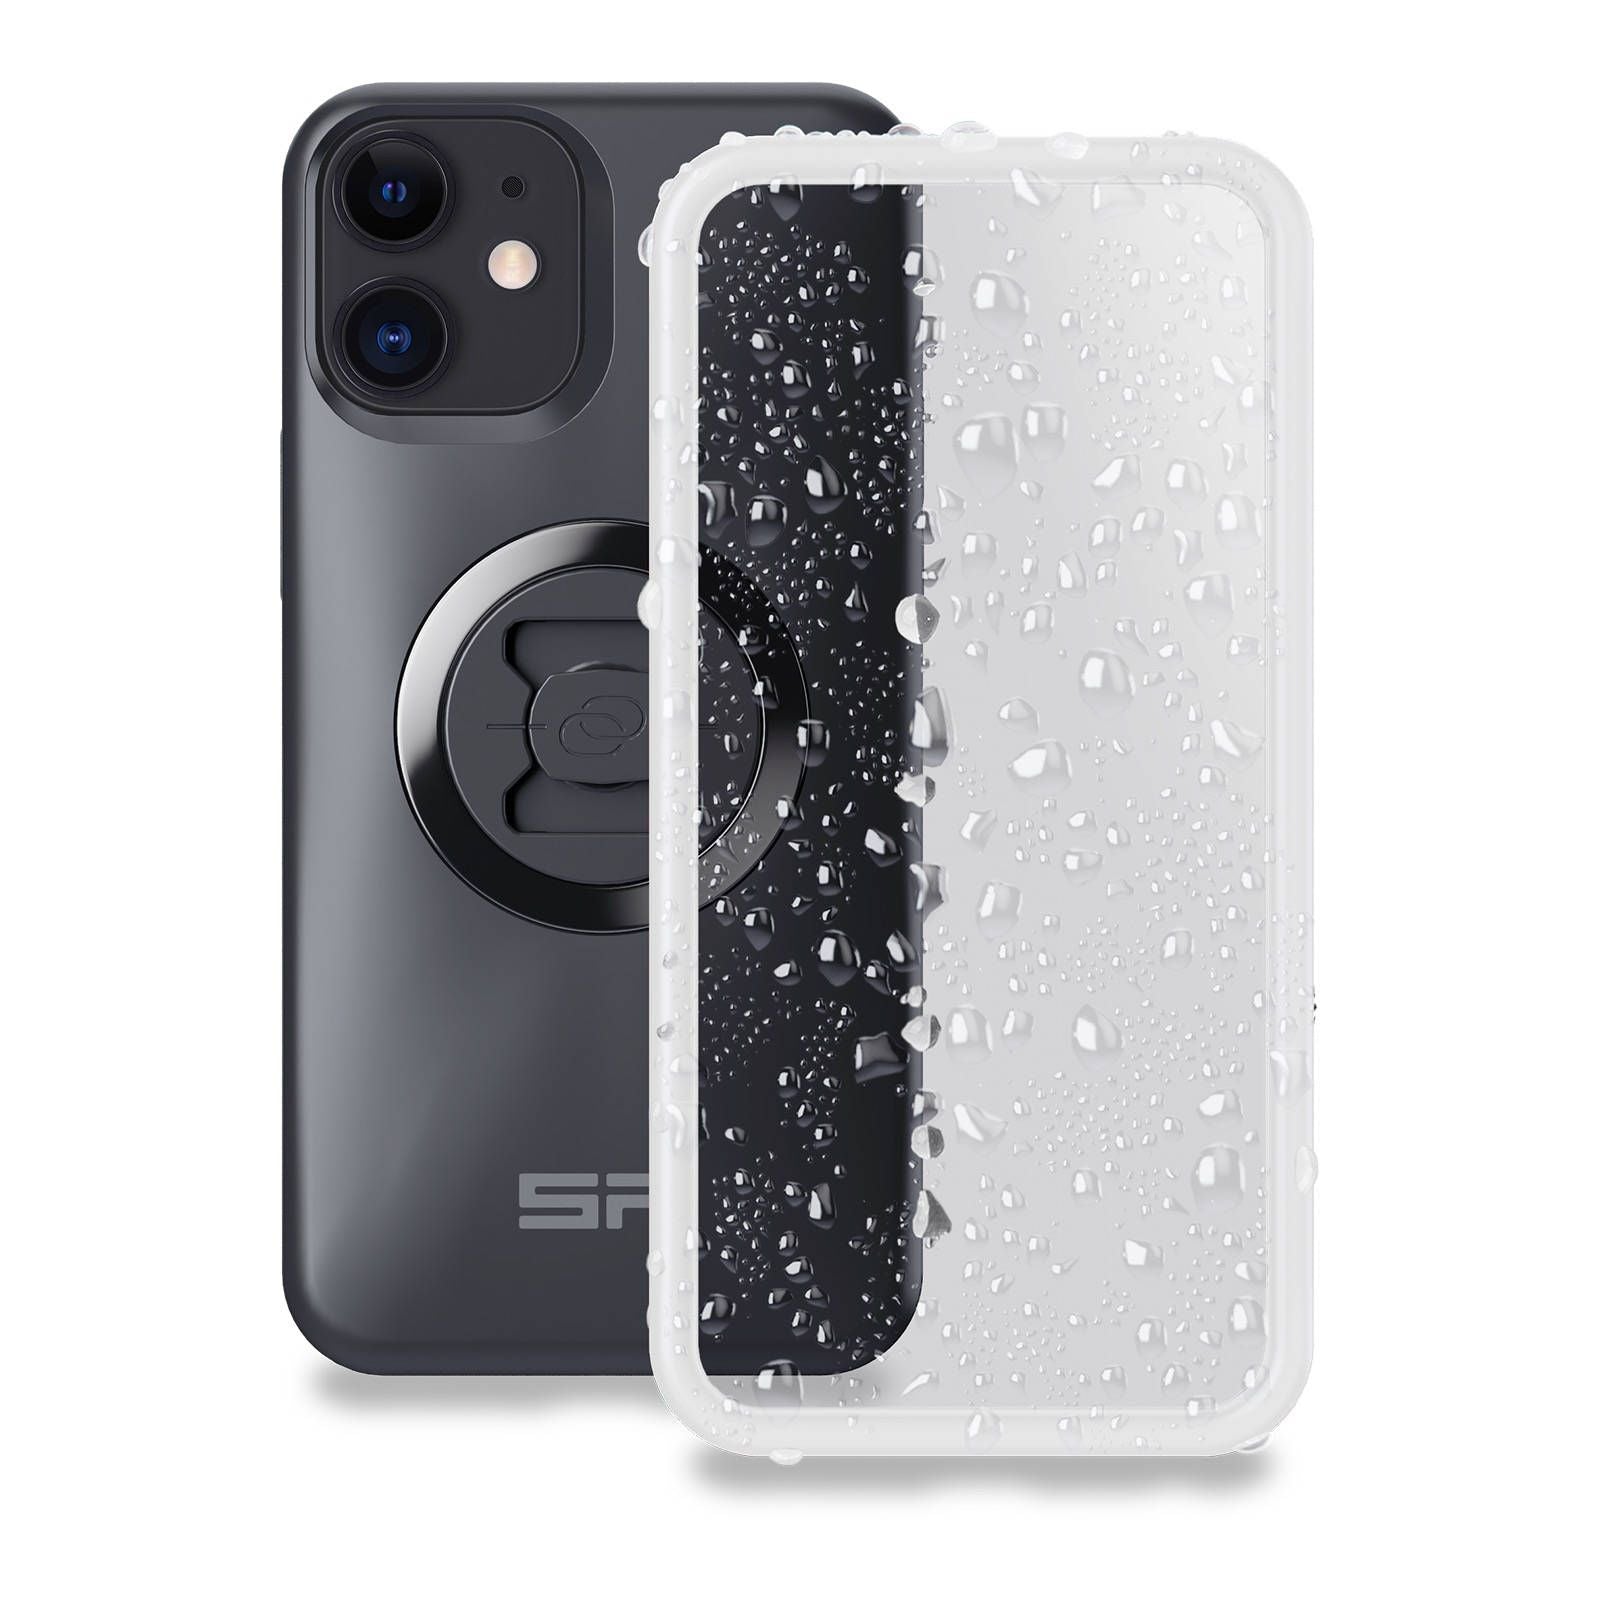 New SP CONNECT WEATHER COVER APPLE IPHONE 12 MINI SPC55232